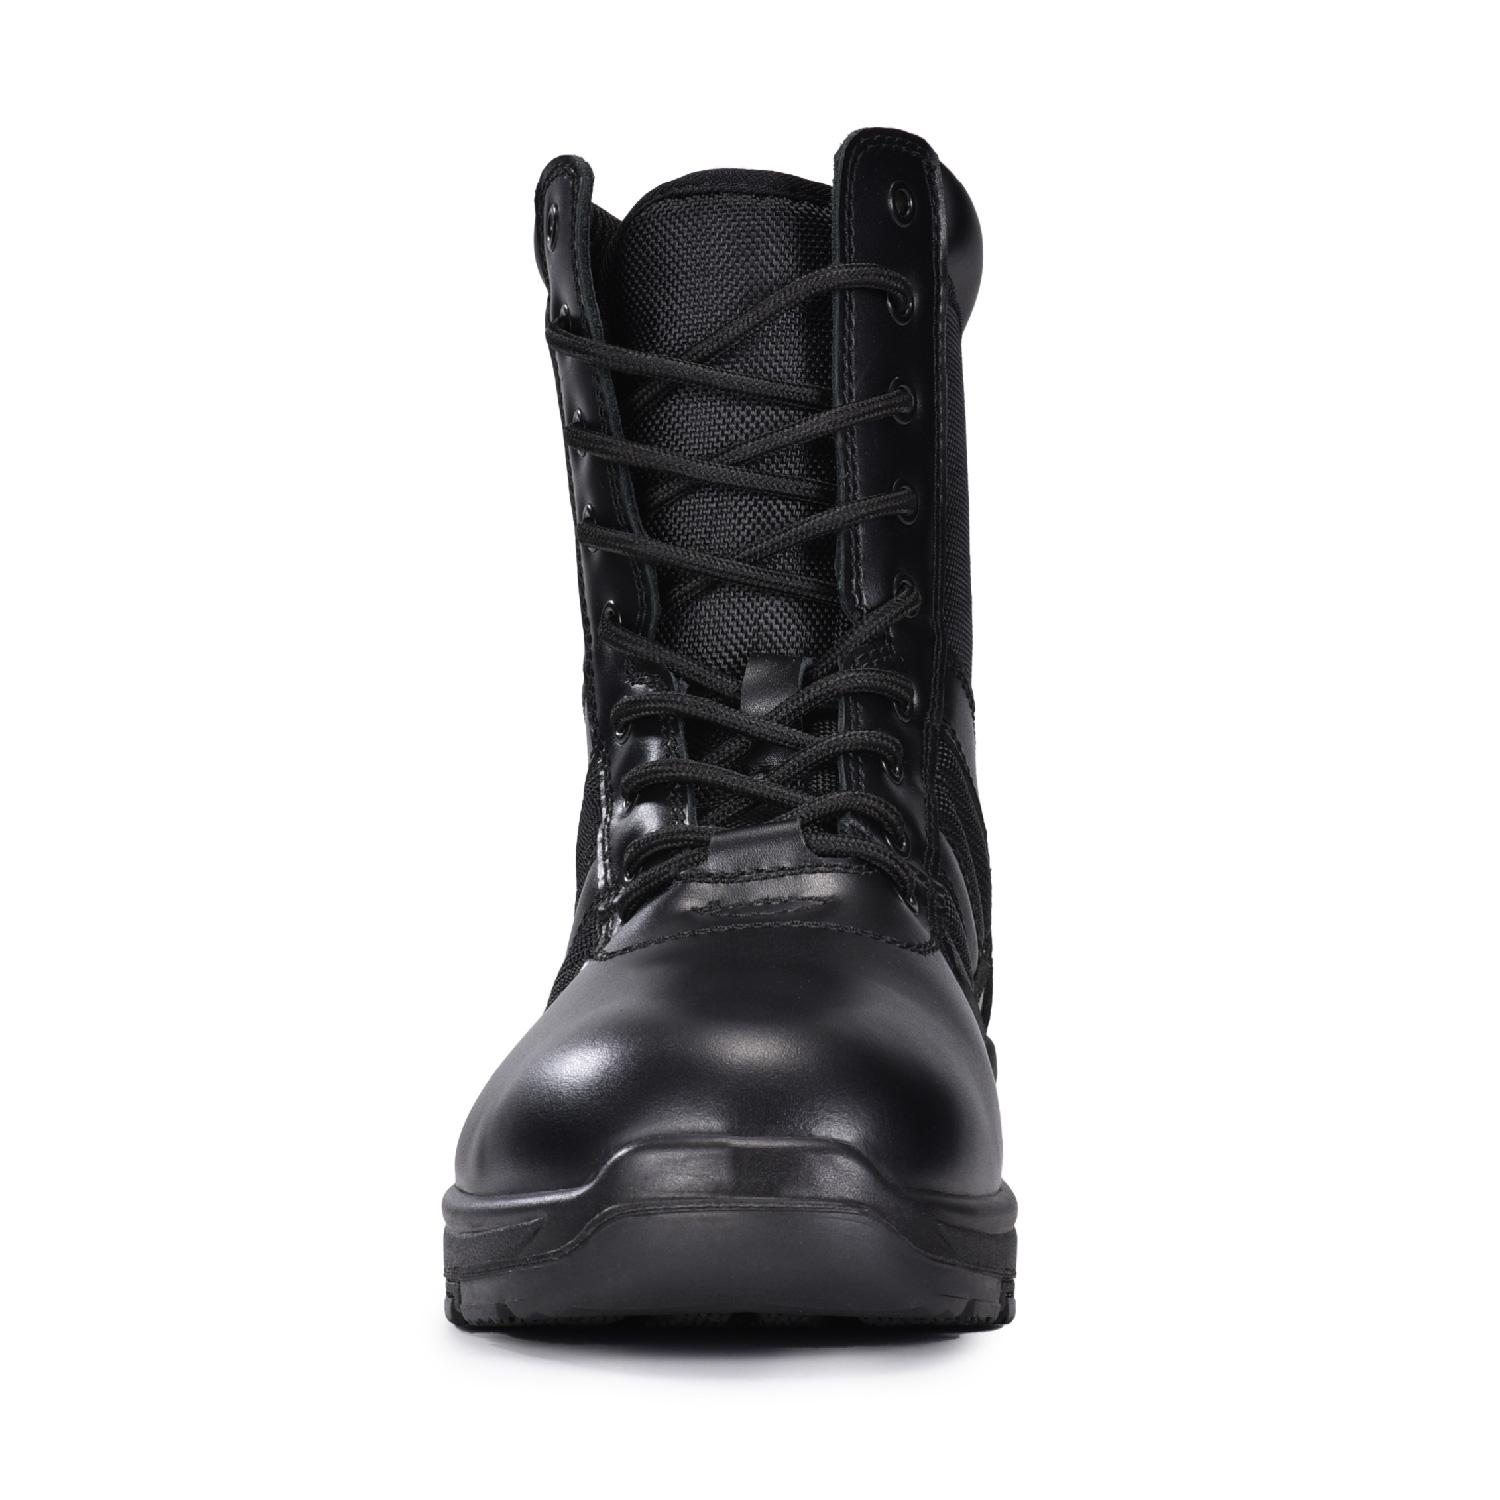 Army/Military Patrol Black Leather Combat Boots for Outdoor or Security H-9551